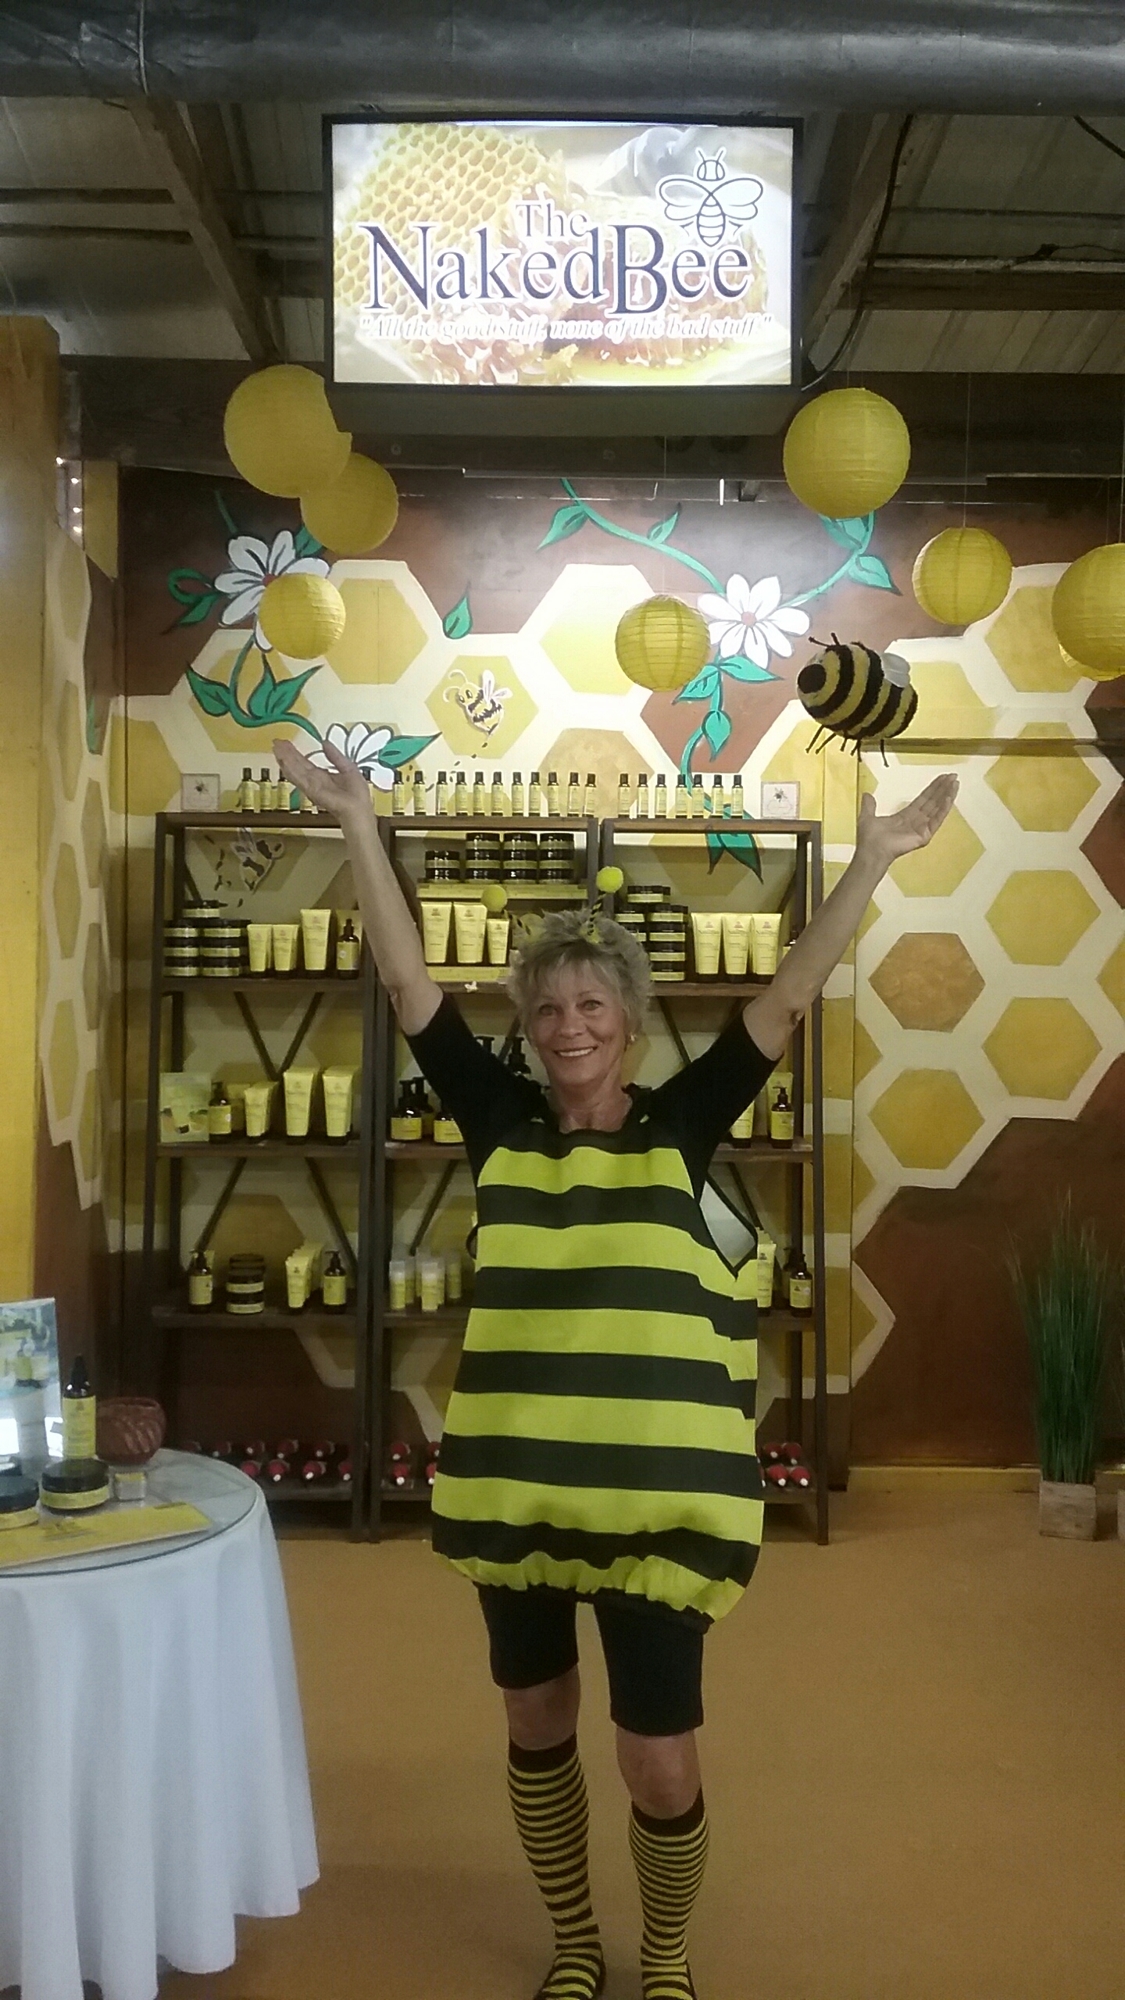 A bee (Diane Robinson) helped celebrate the addition of the Naked Bee line of skin care products at Nina’s Nook at the Daytona Beach Flea Market. Courtesy photo